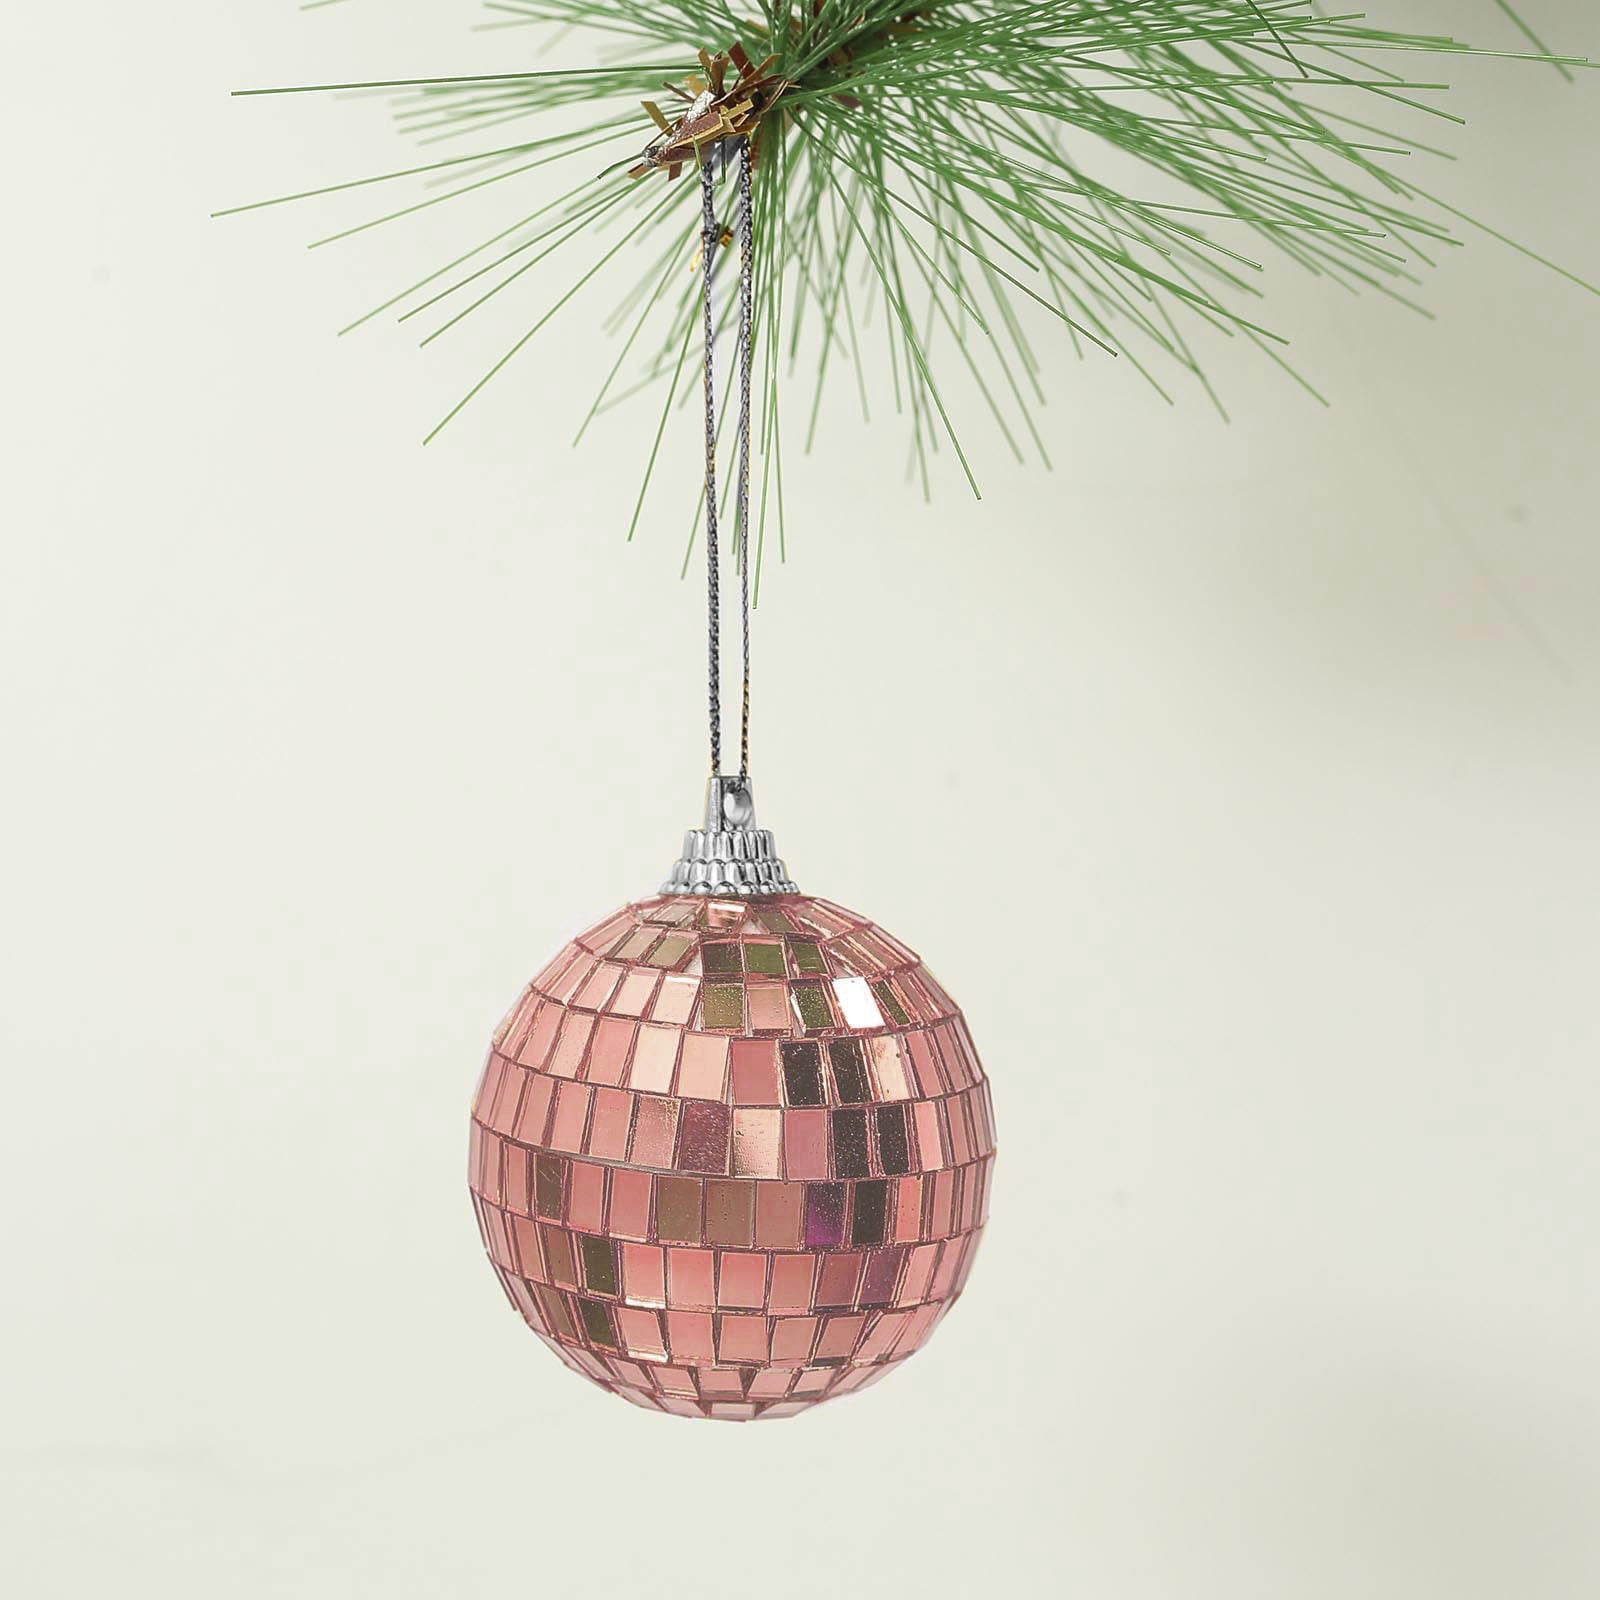 Gold & Pink Stripy Disco Ball.handmade Blue and Green Disco Glitter Ball  Groovy-retro Interior-party-mirror Tiles-party Decor-personalised 